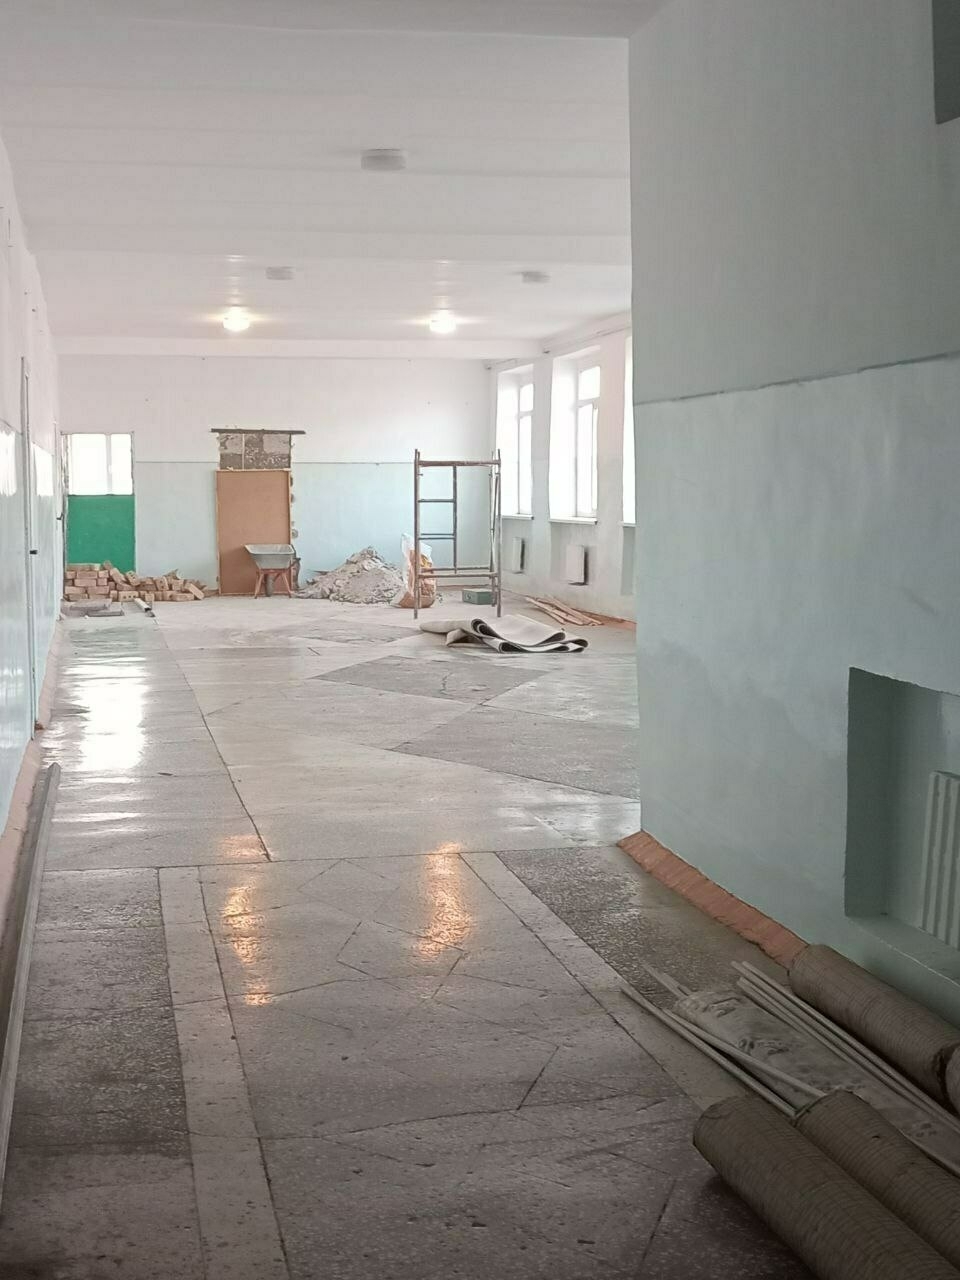 bricks and other building supplies in a school hall